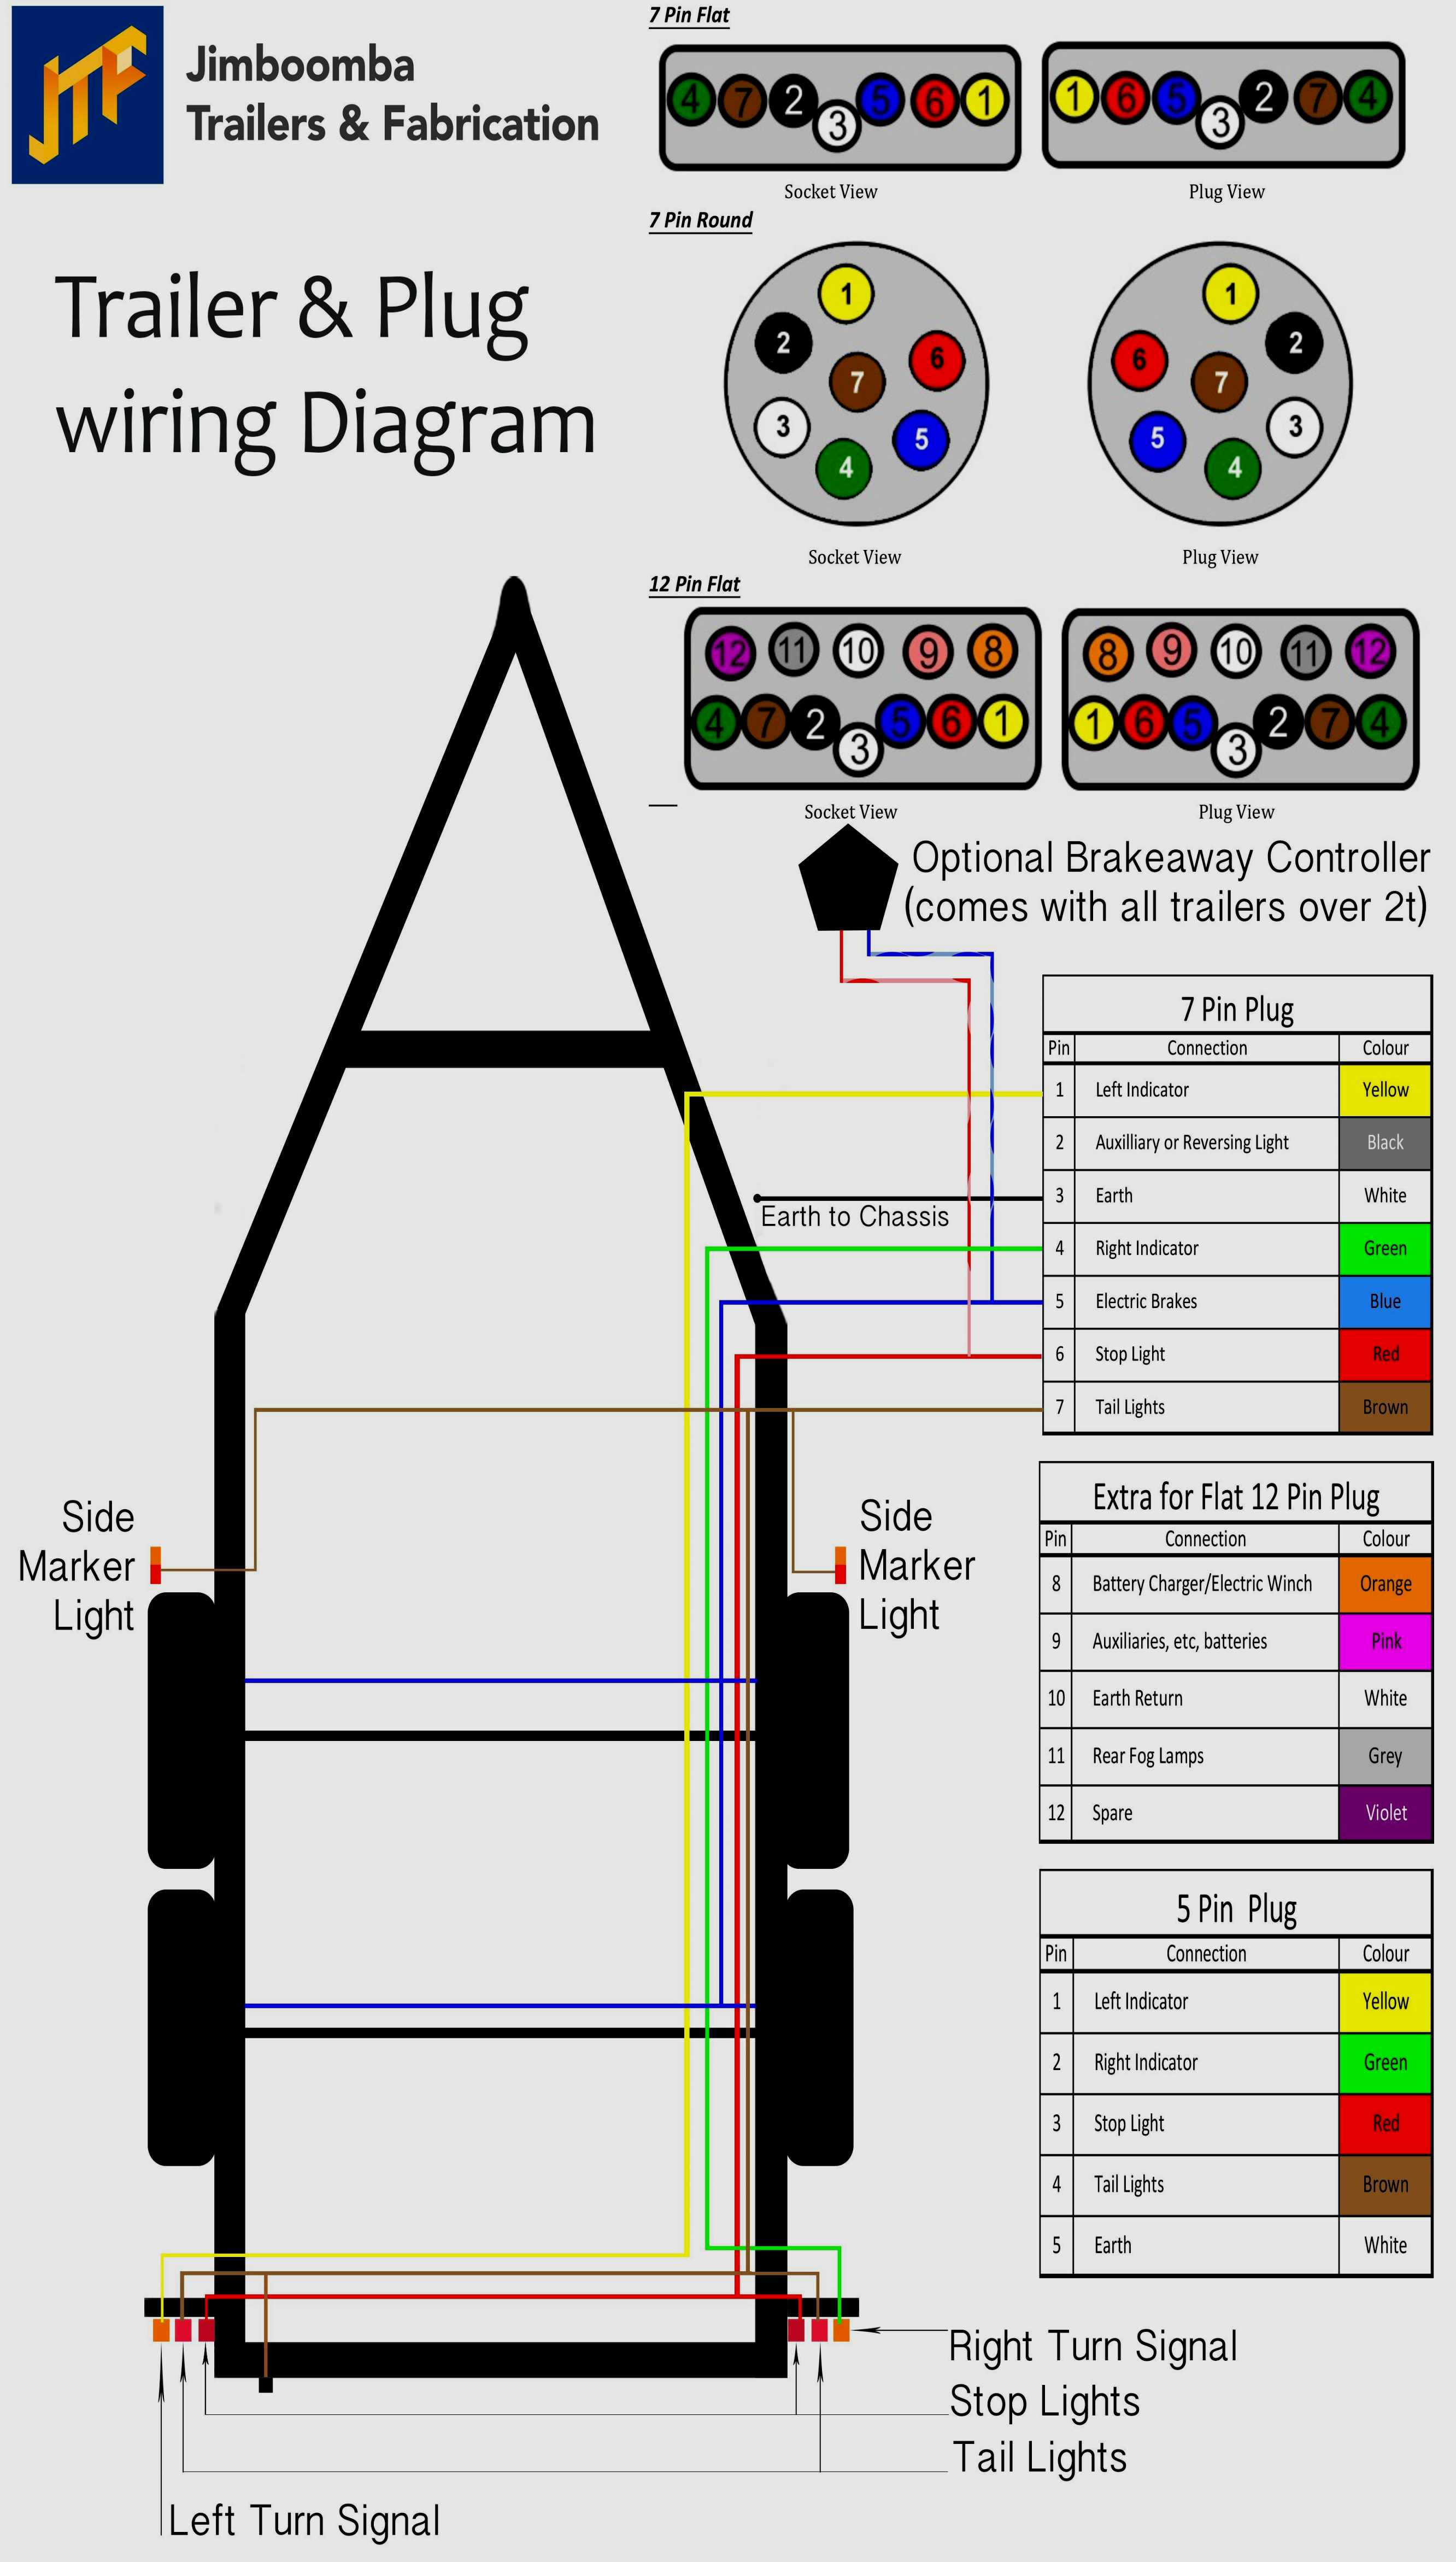 Wiring Diagram For 9 Pin Trailer Connector - Wiring Diagram Data - 7 Blade Trailer Connector Wiring Diagram